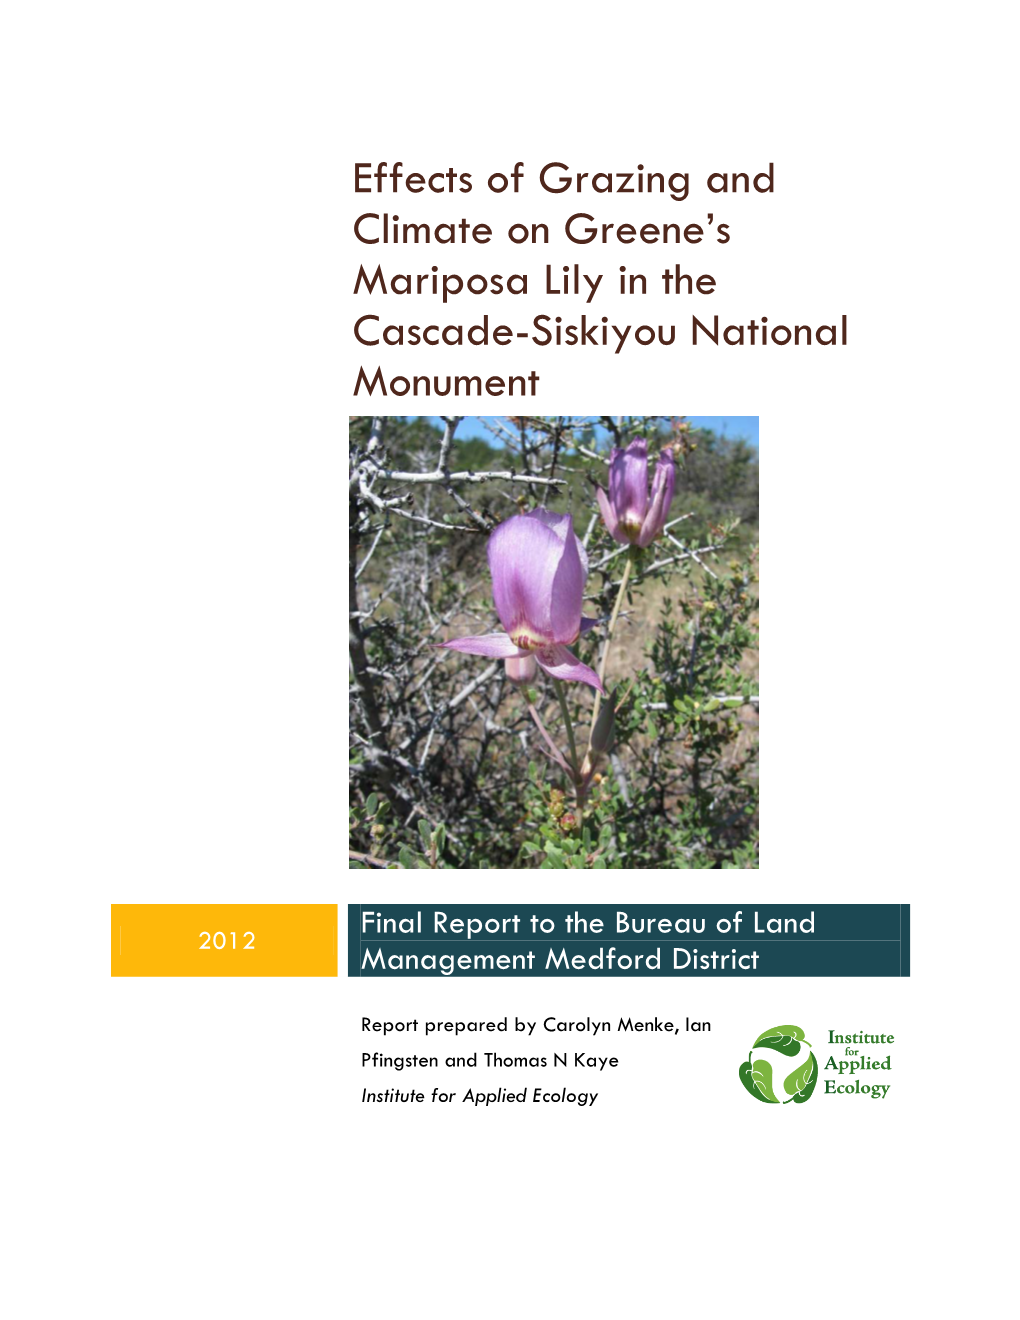 Effects of Grazing and Climate on Greene's Mariposa Lily in the Cascade-Siskiyou National Monument